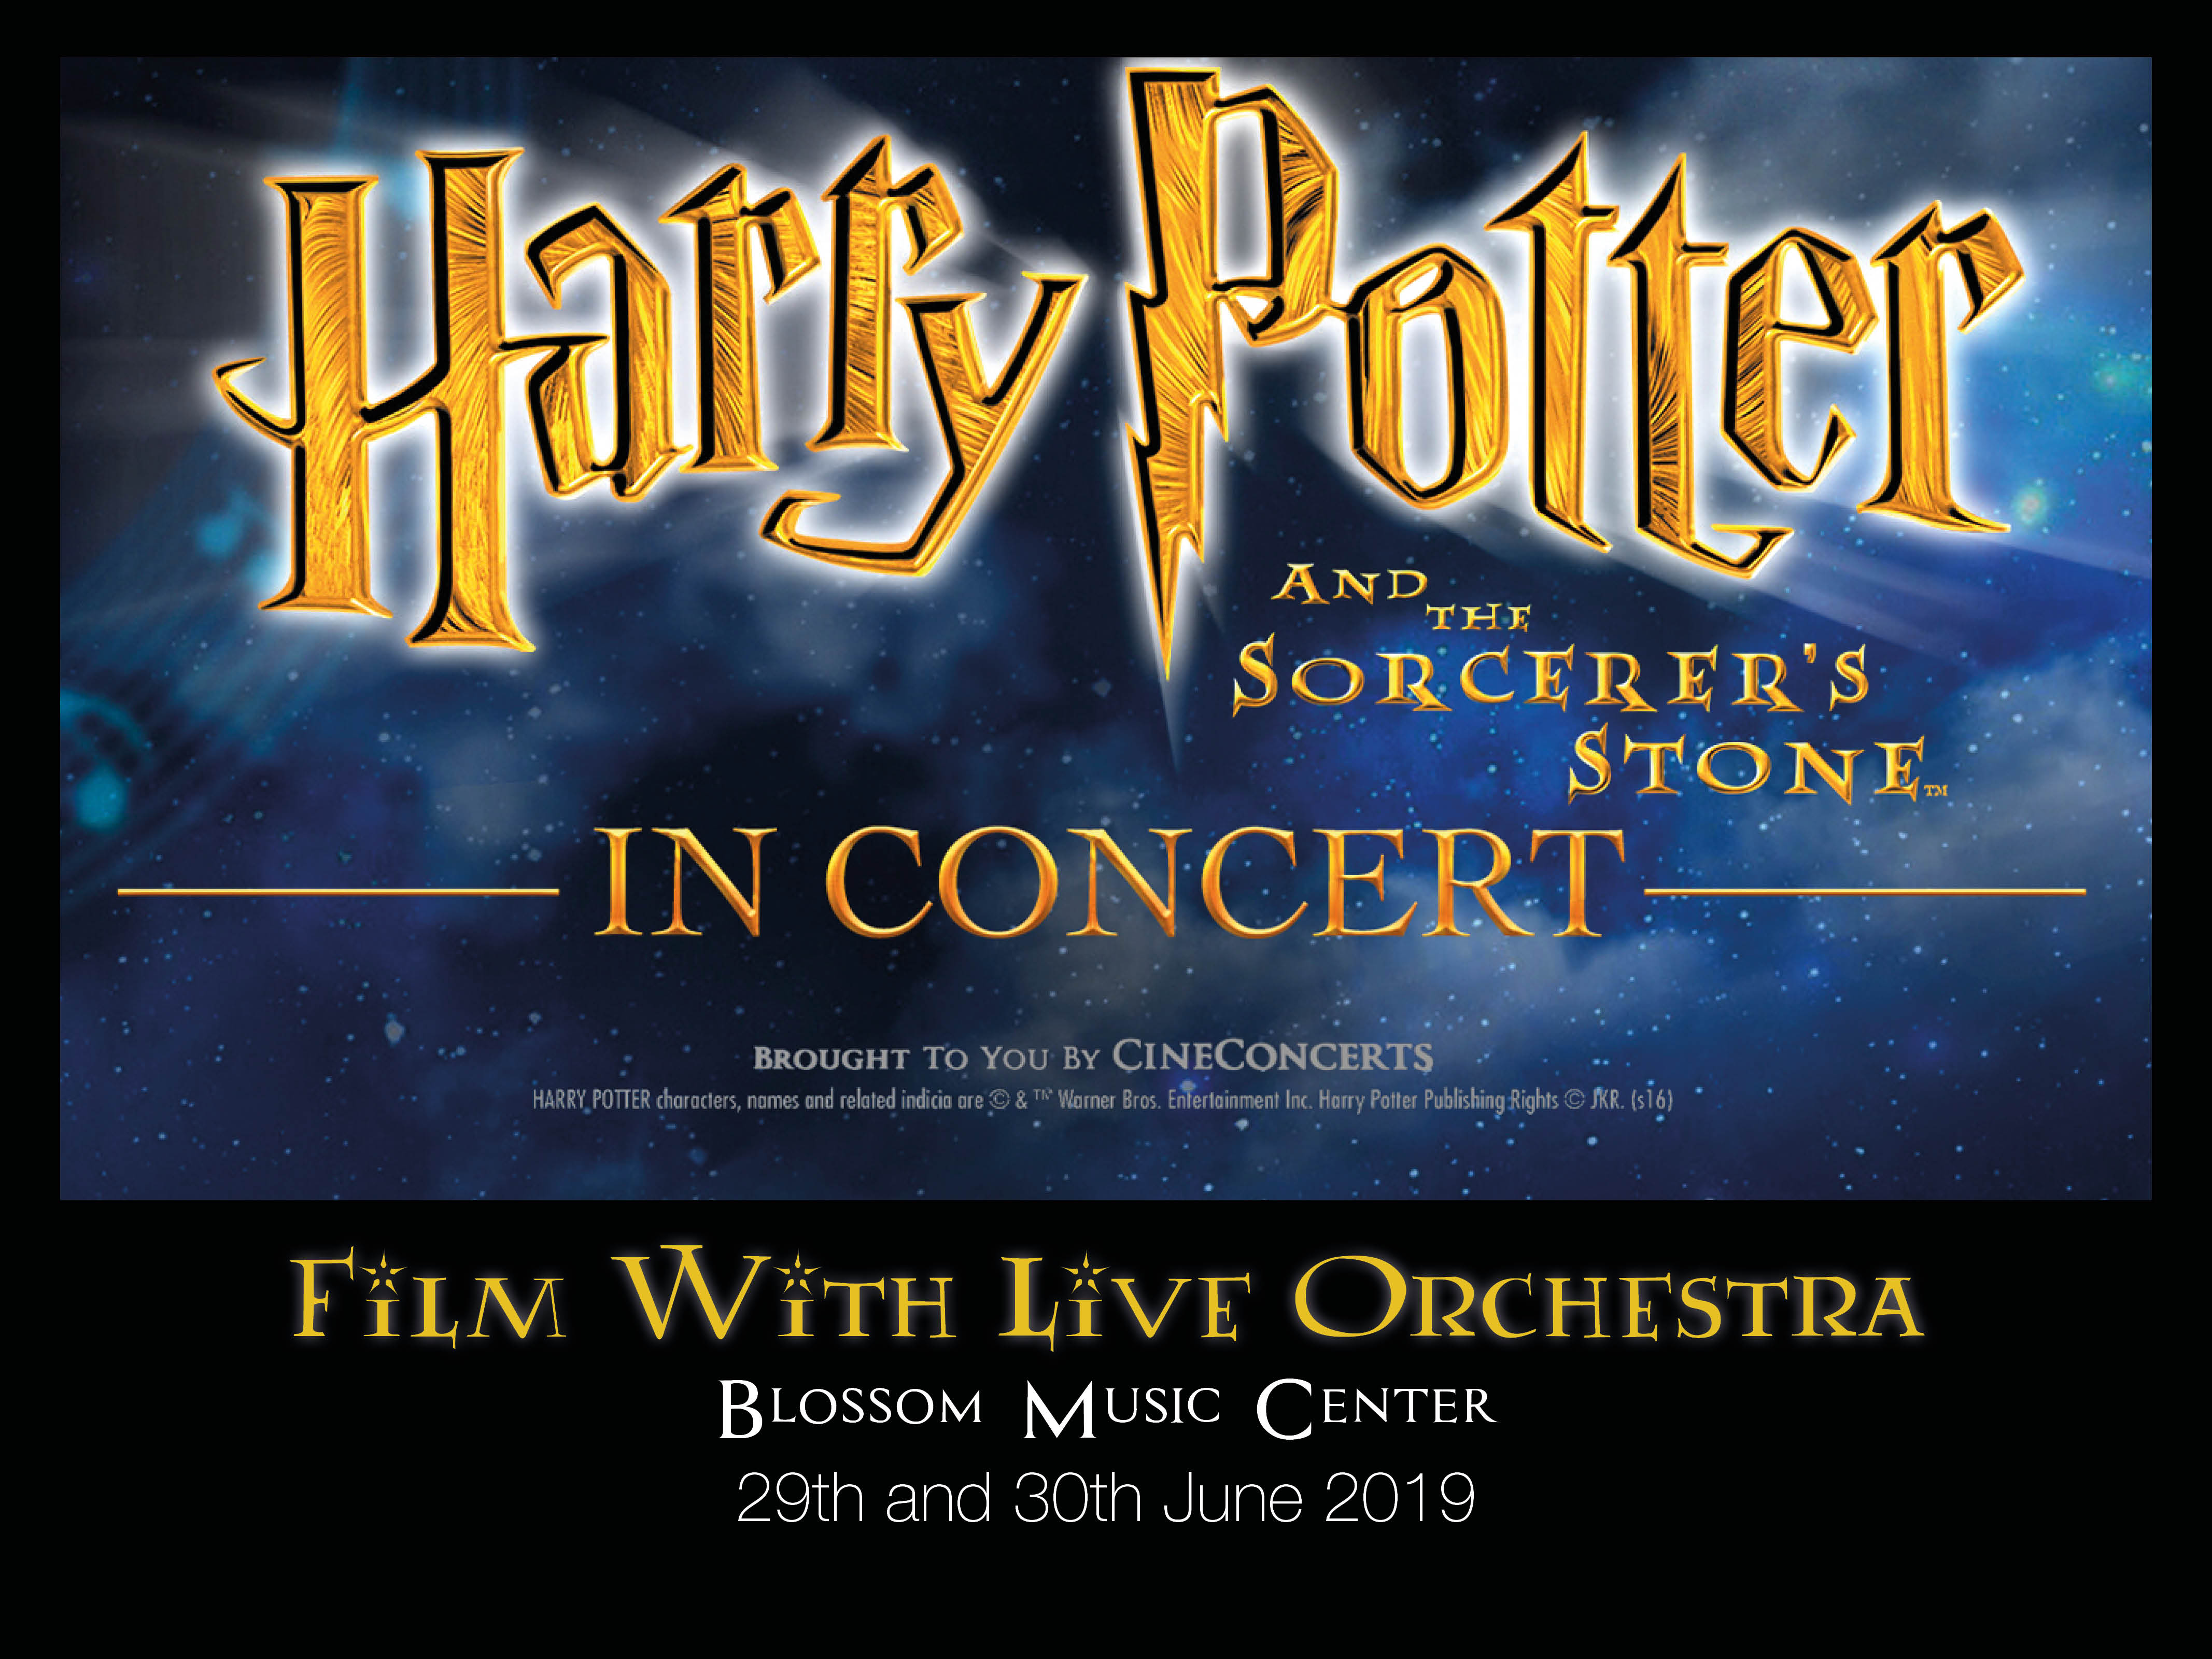 The Cleveland Orchestra: Justin Freer – Harry Potter and The Sorcerer’s Stone – Film With Live Orchestra